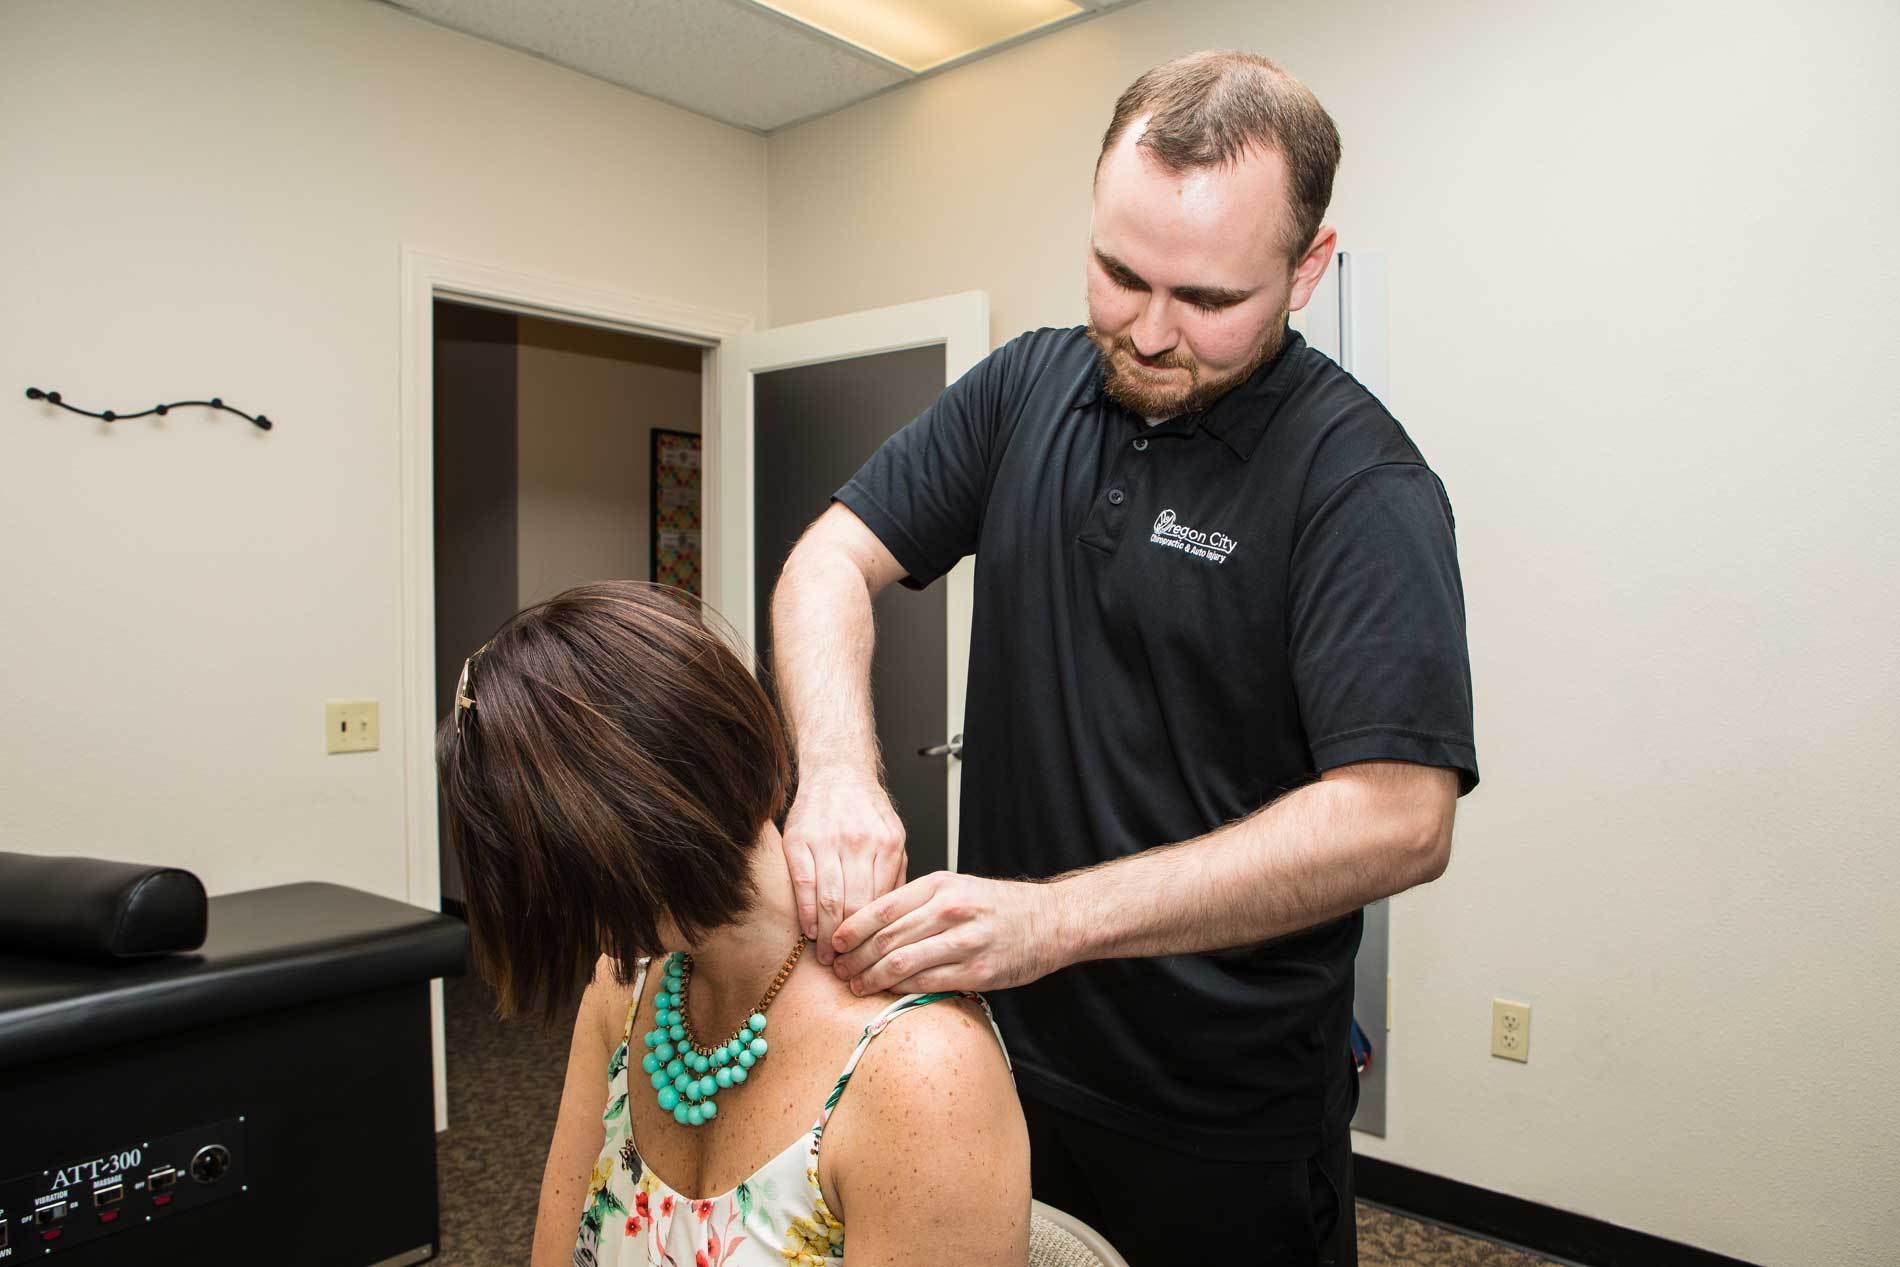 Read the testimonials for SE Portland Chiropractic and auto injury